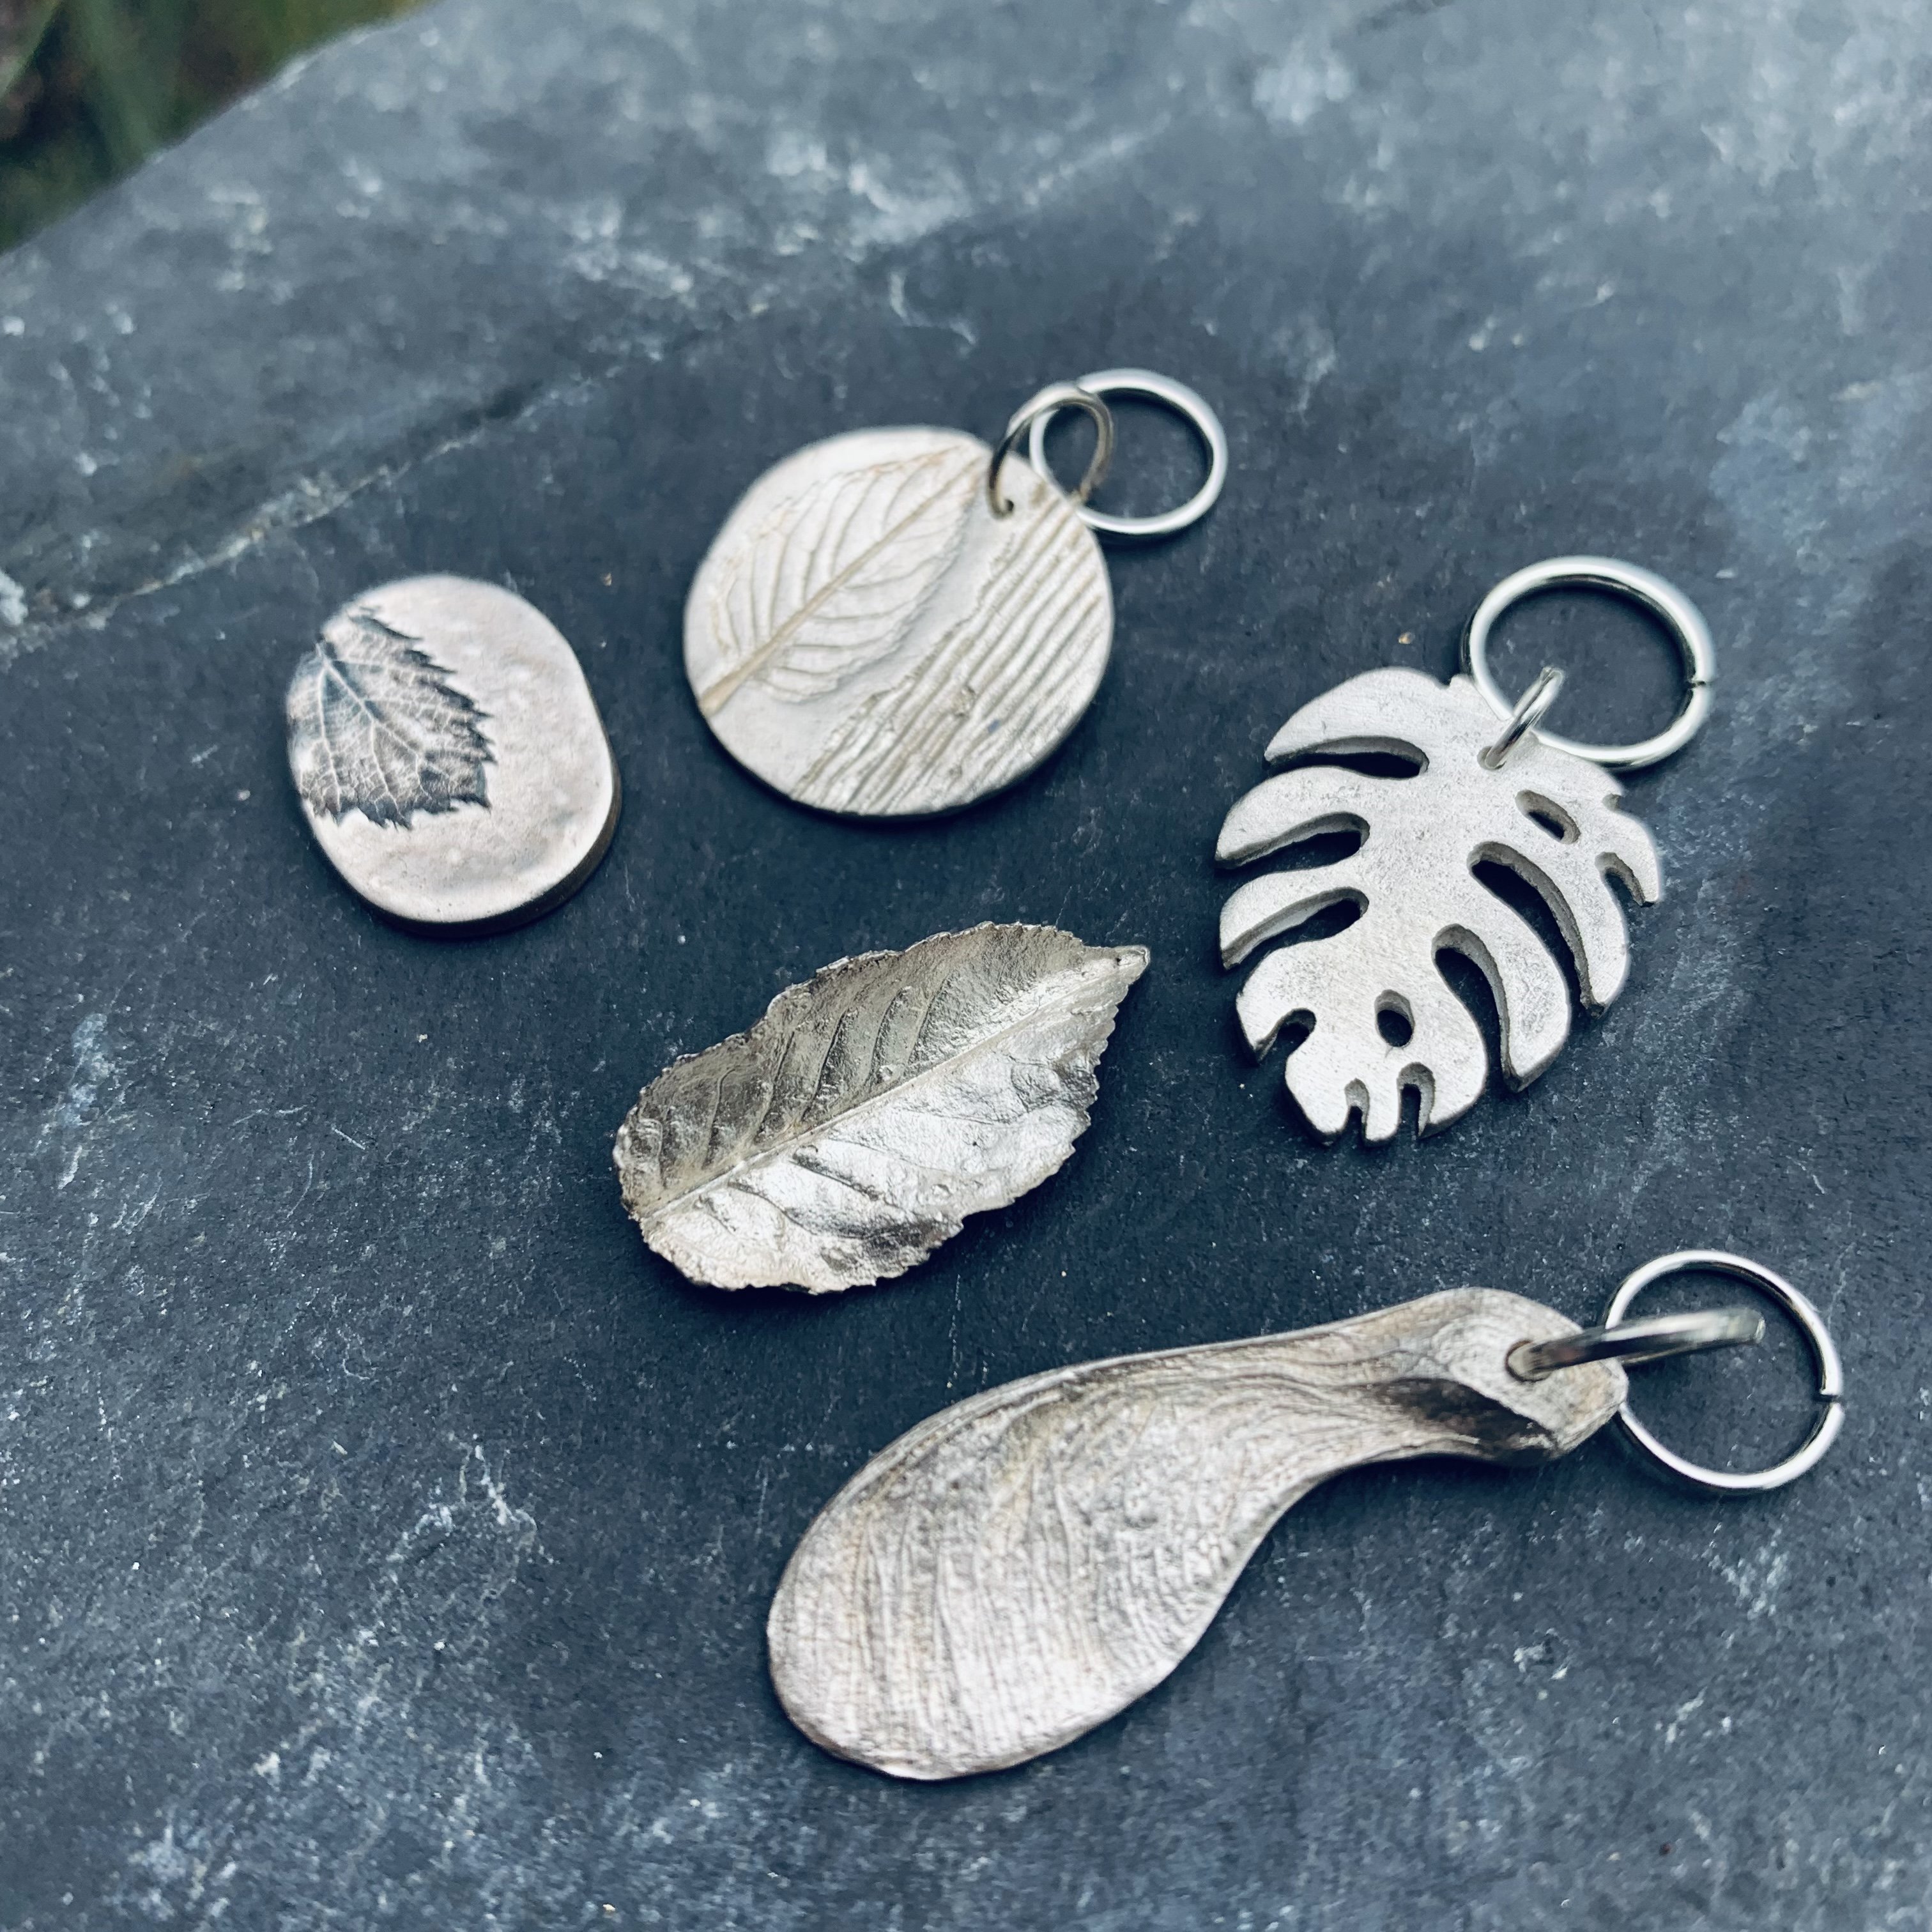 Intermediate Silver Clay Jewellery Workshop Learn at Home in Your Own Time
